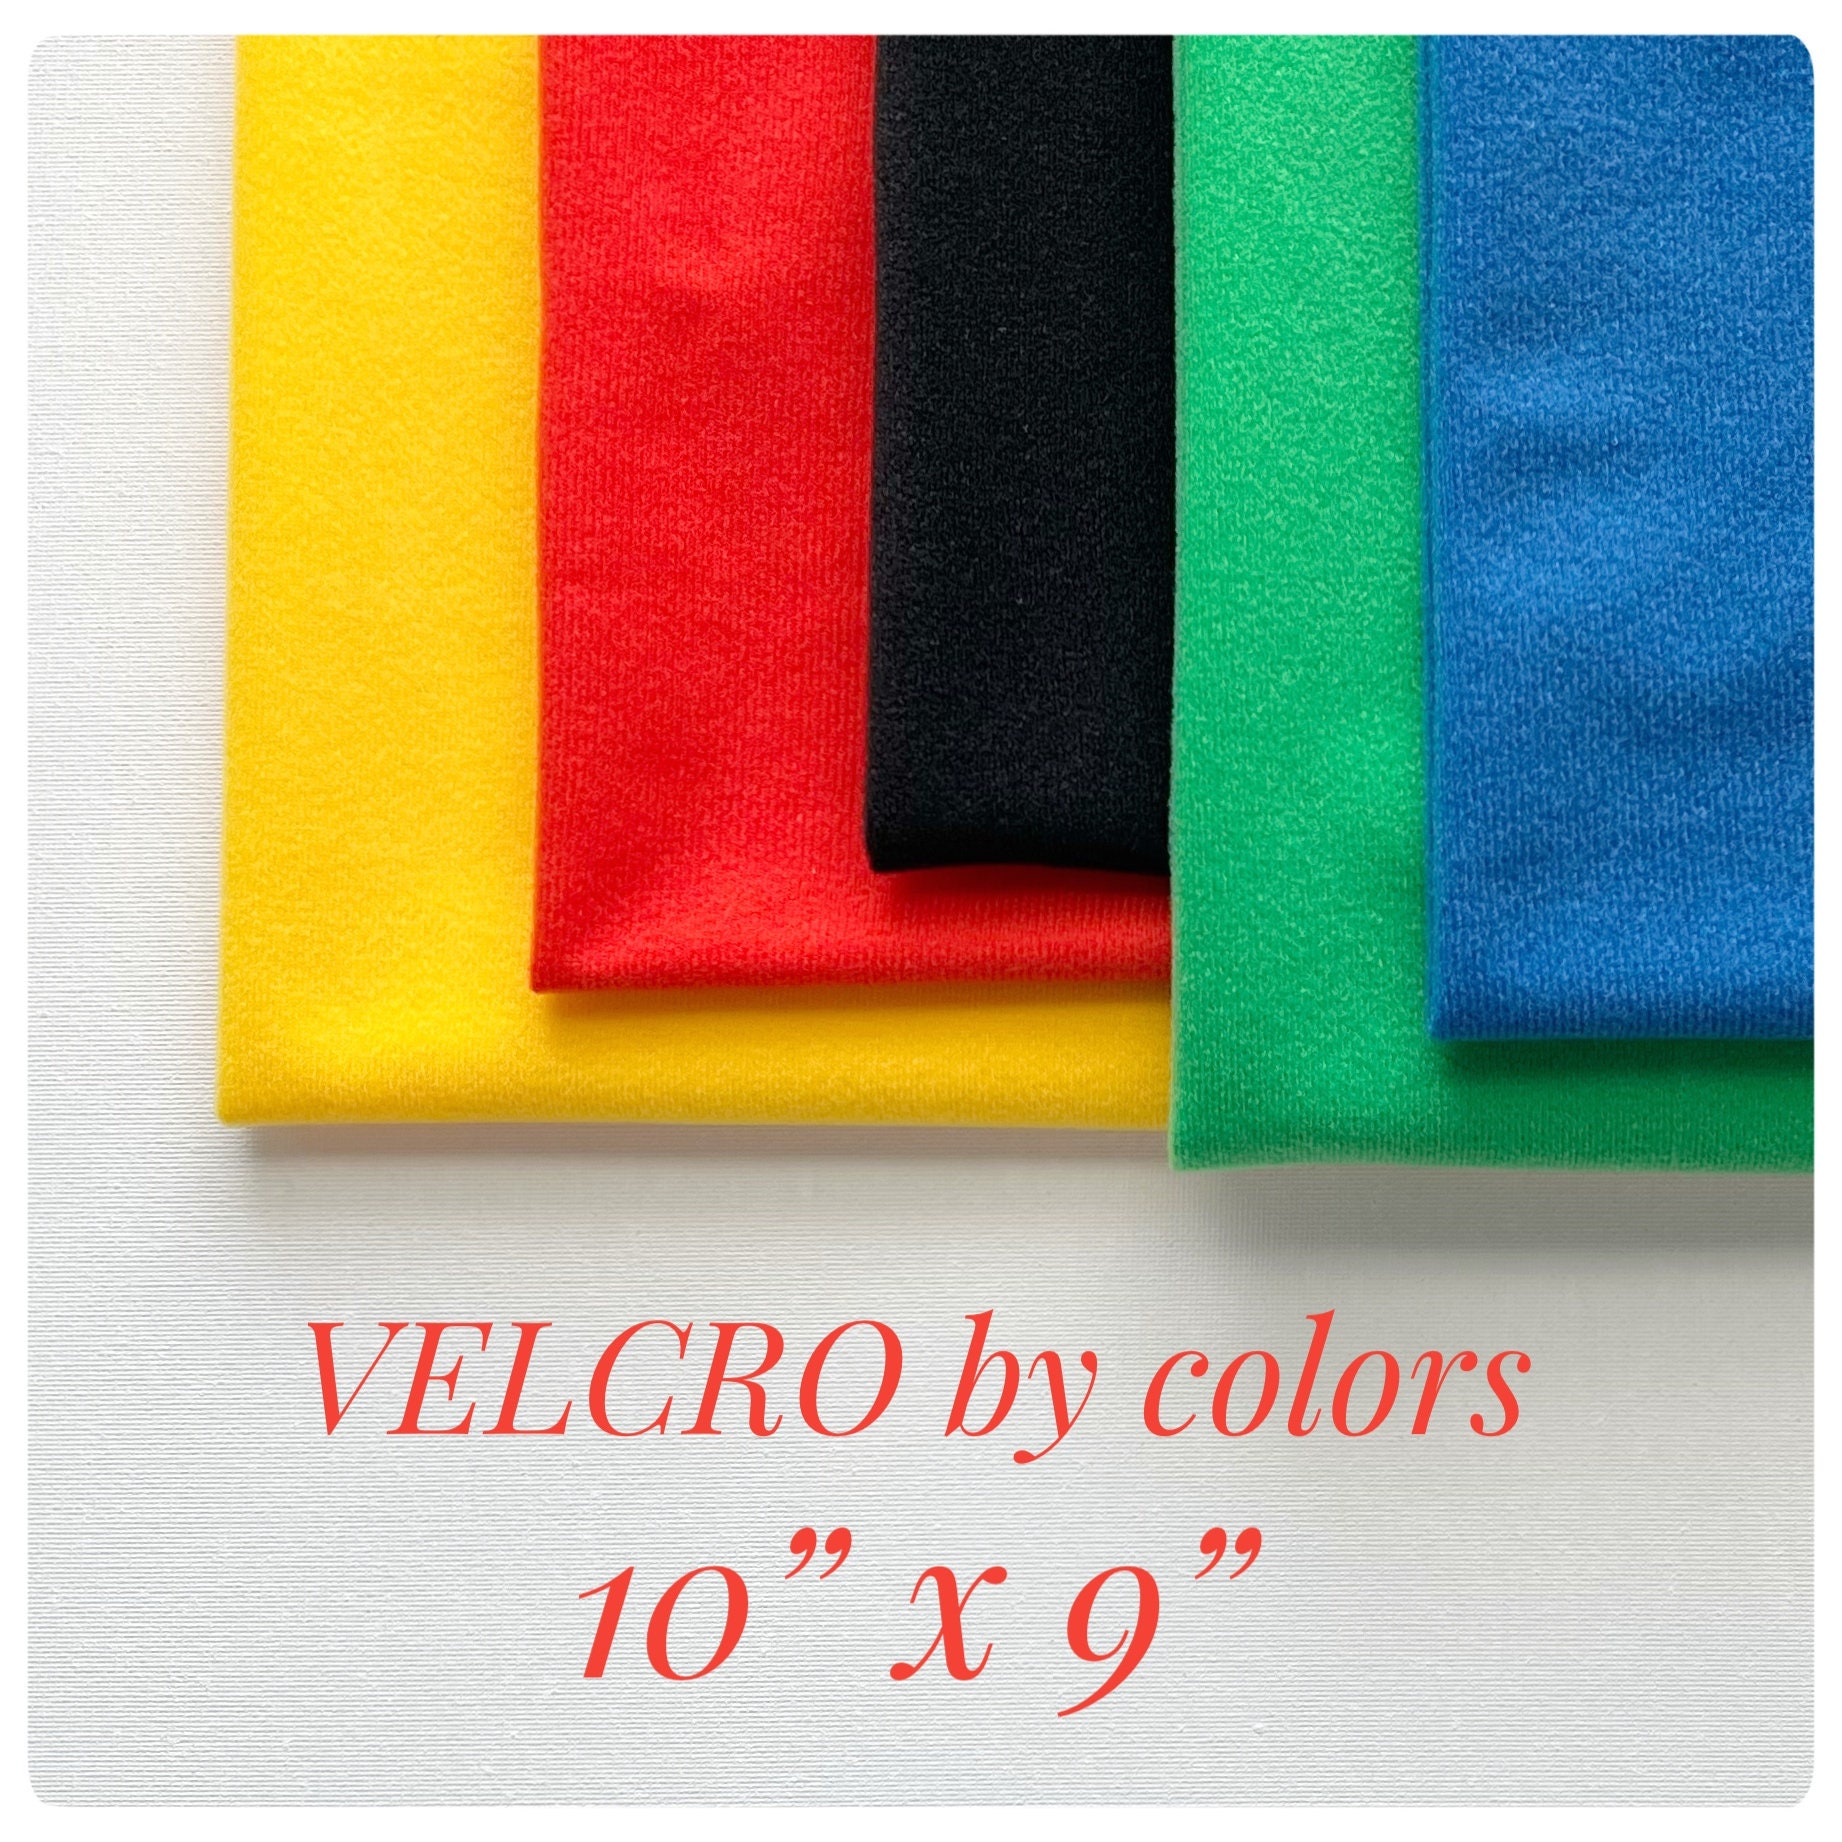 Velcro Loop Carpet Fabric Colors For Display Boards